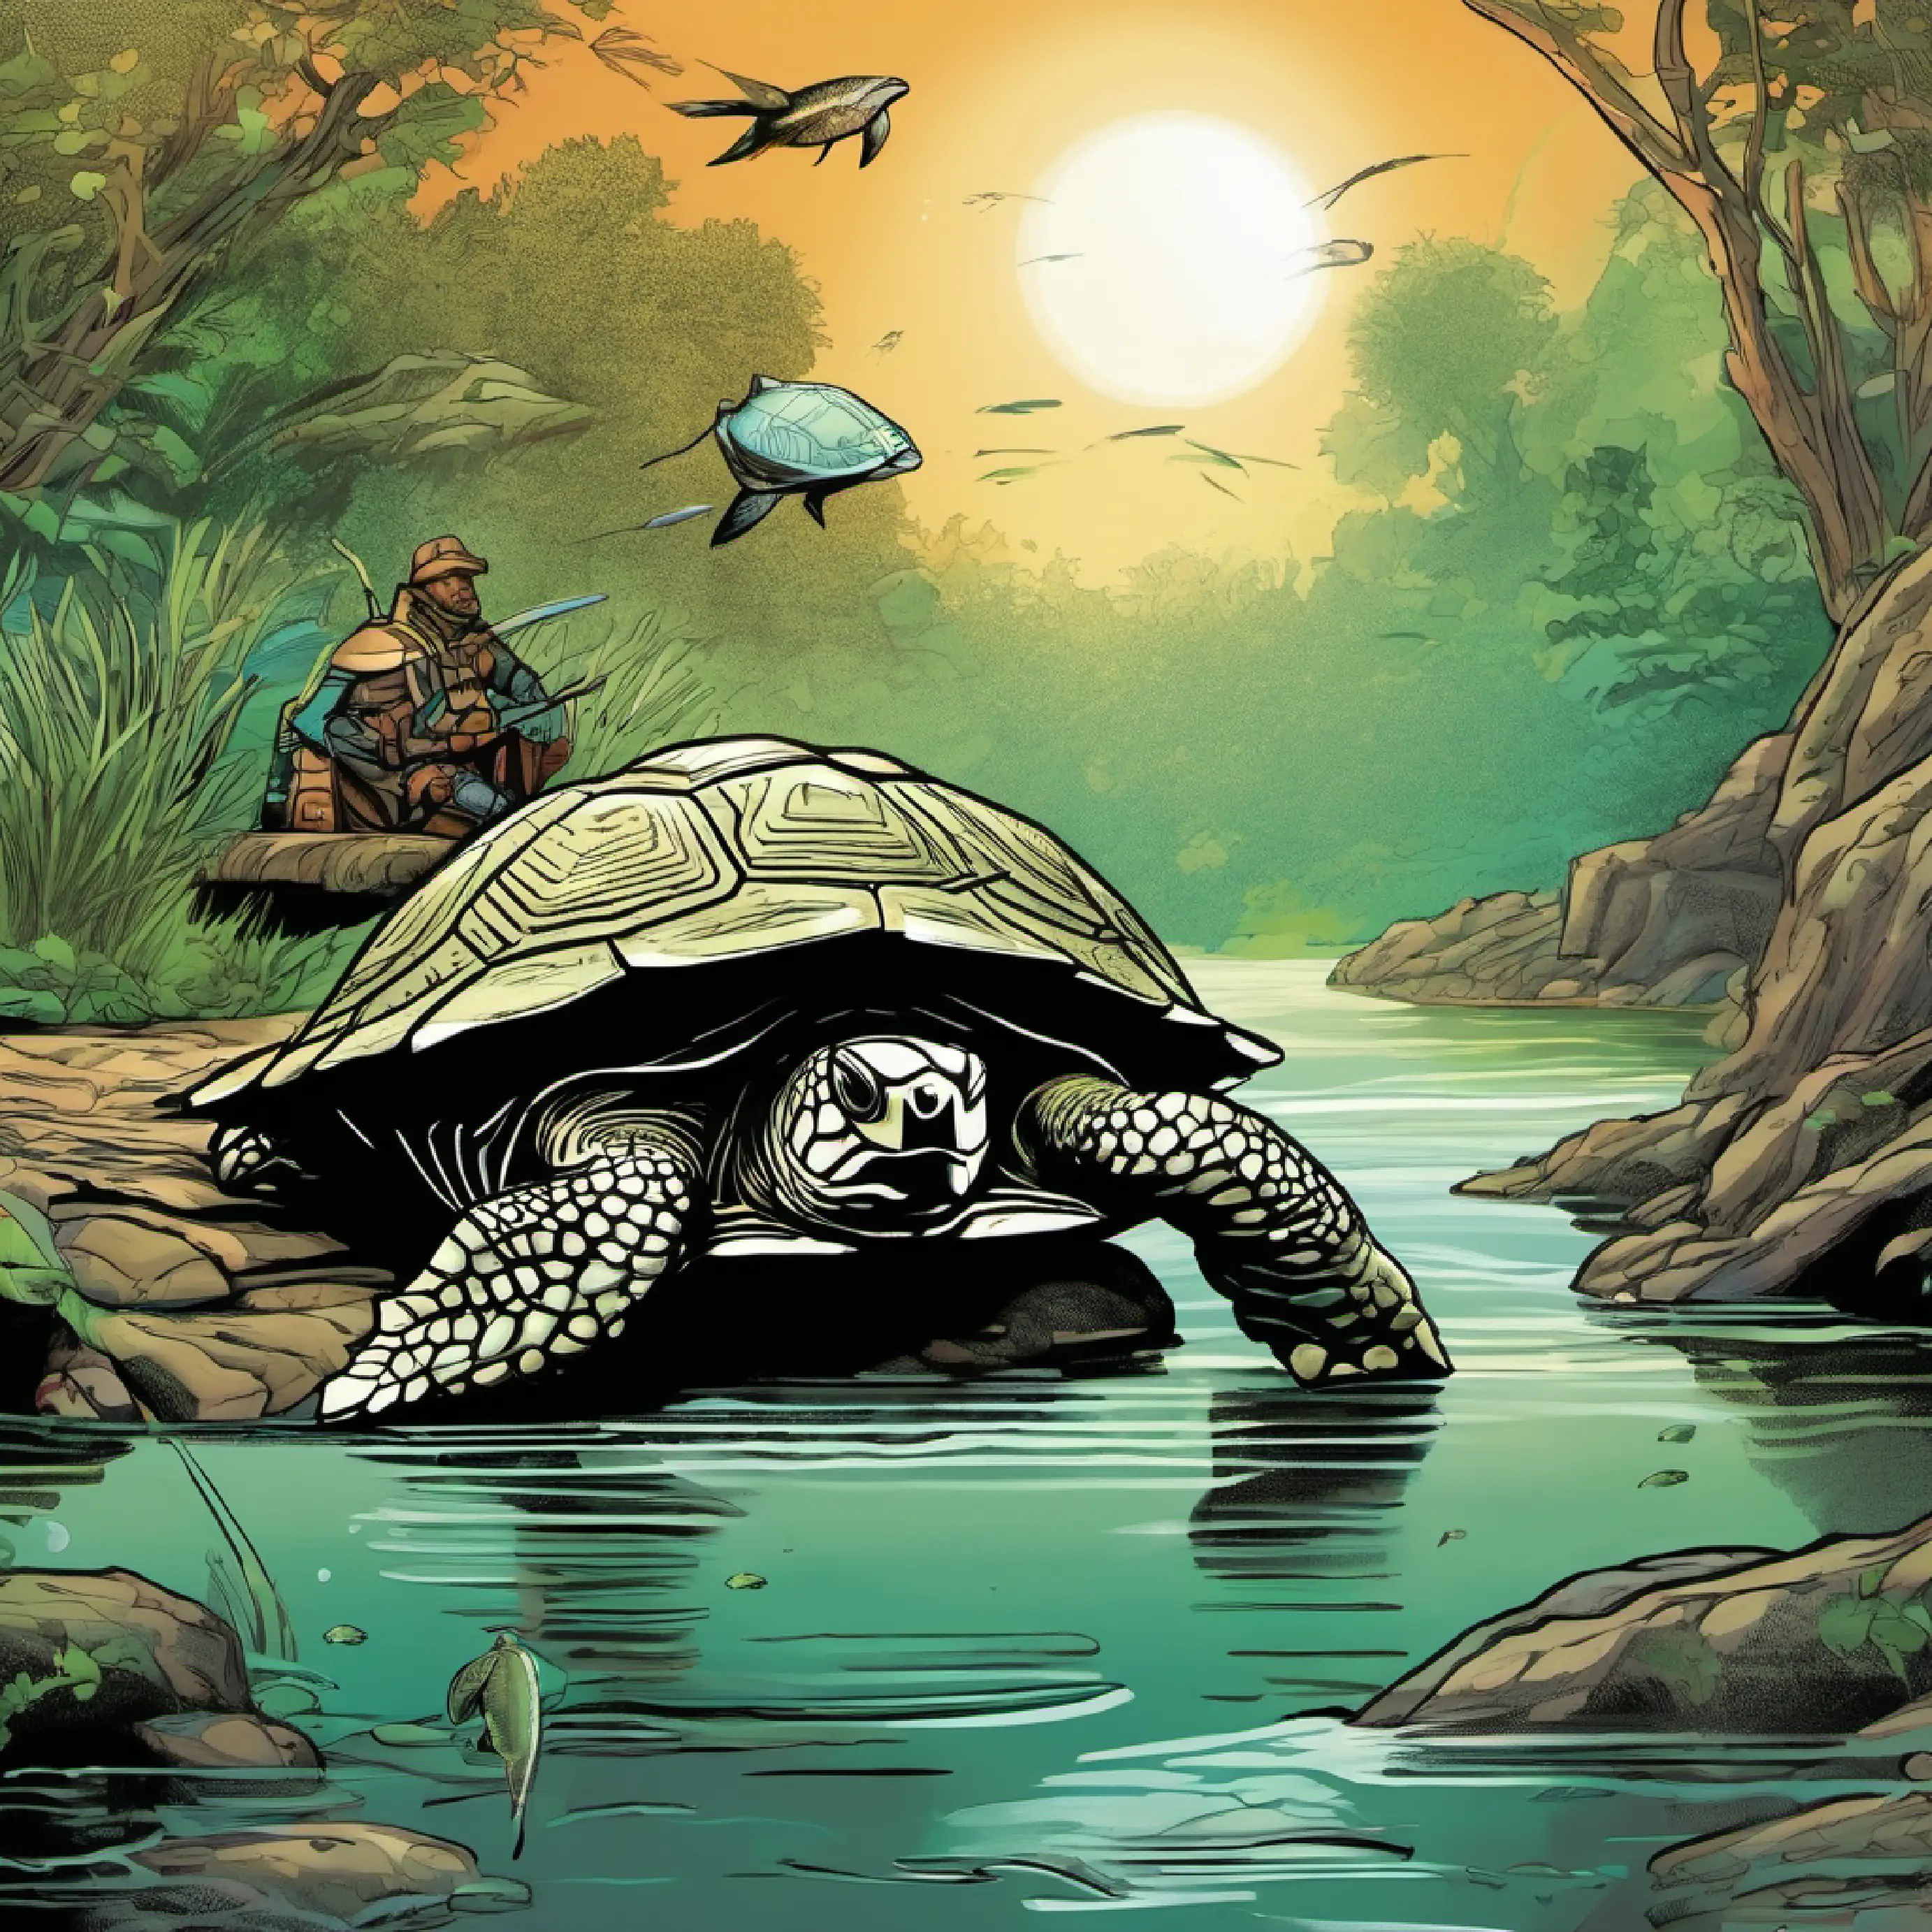 Meeting a wise turtle, they learn about the Angler Leviathan guarding their path.